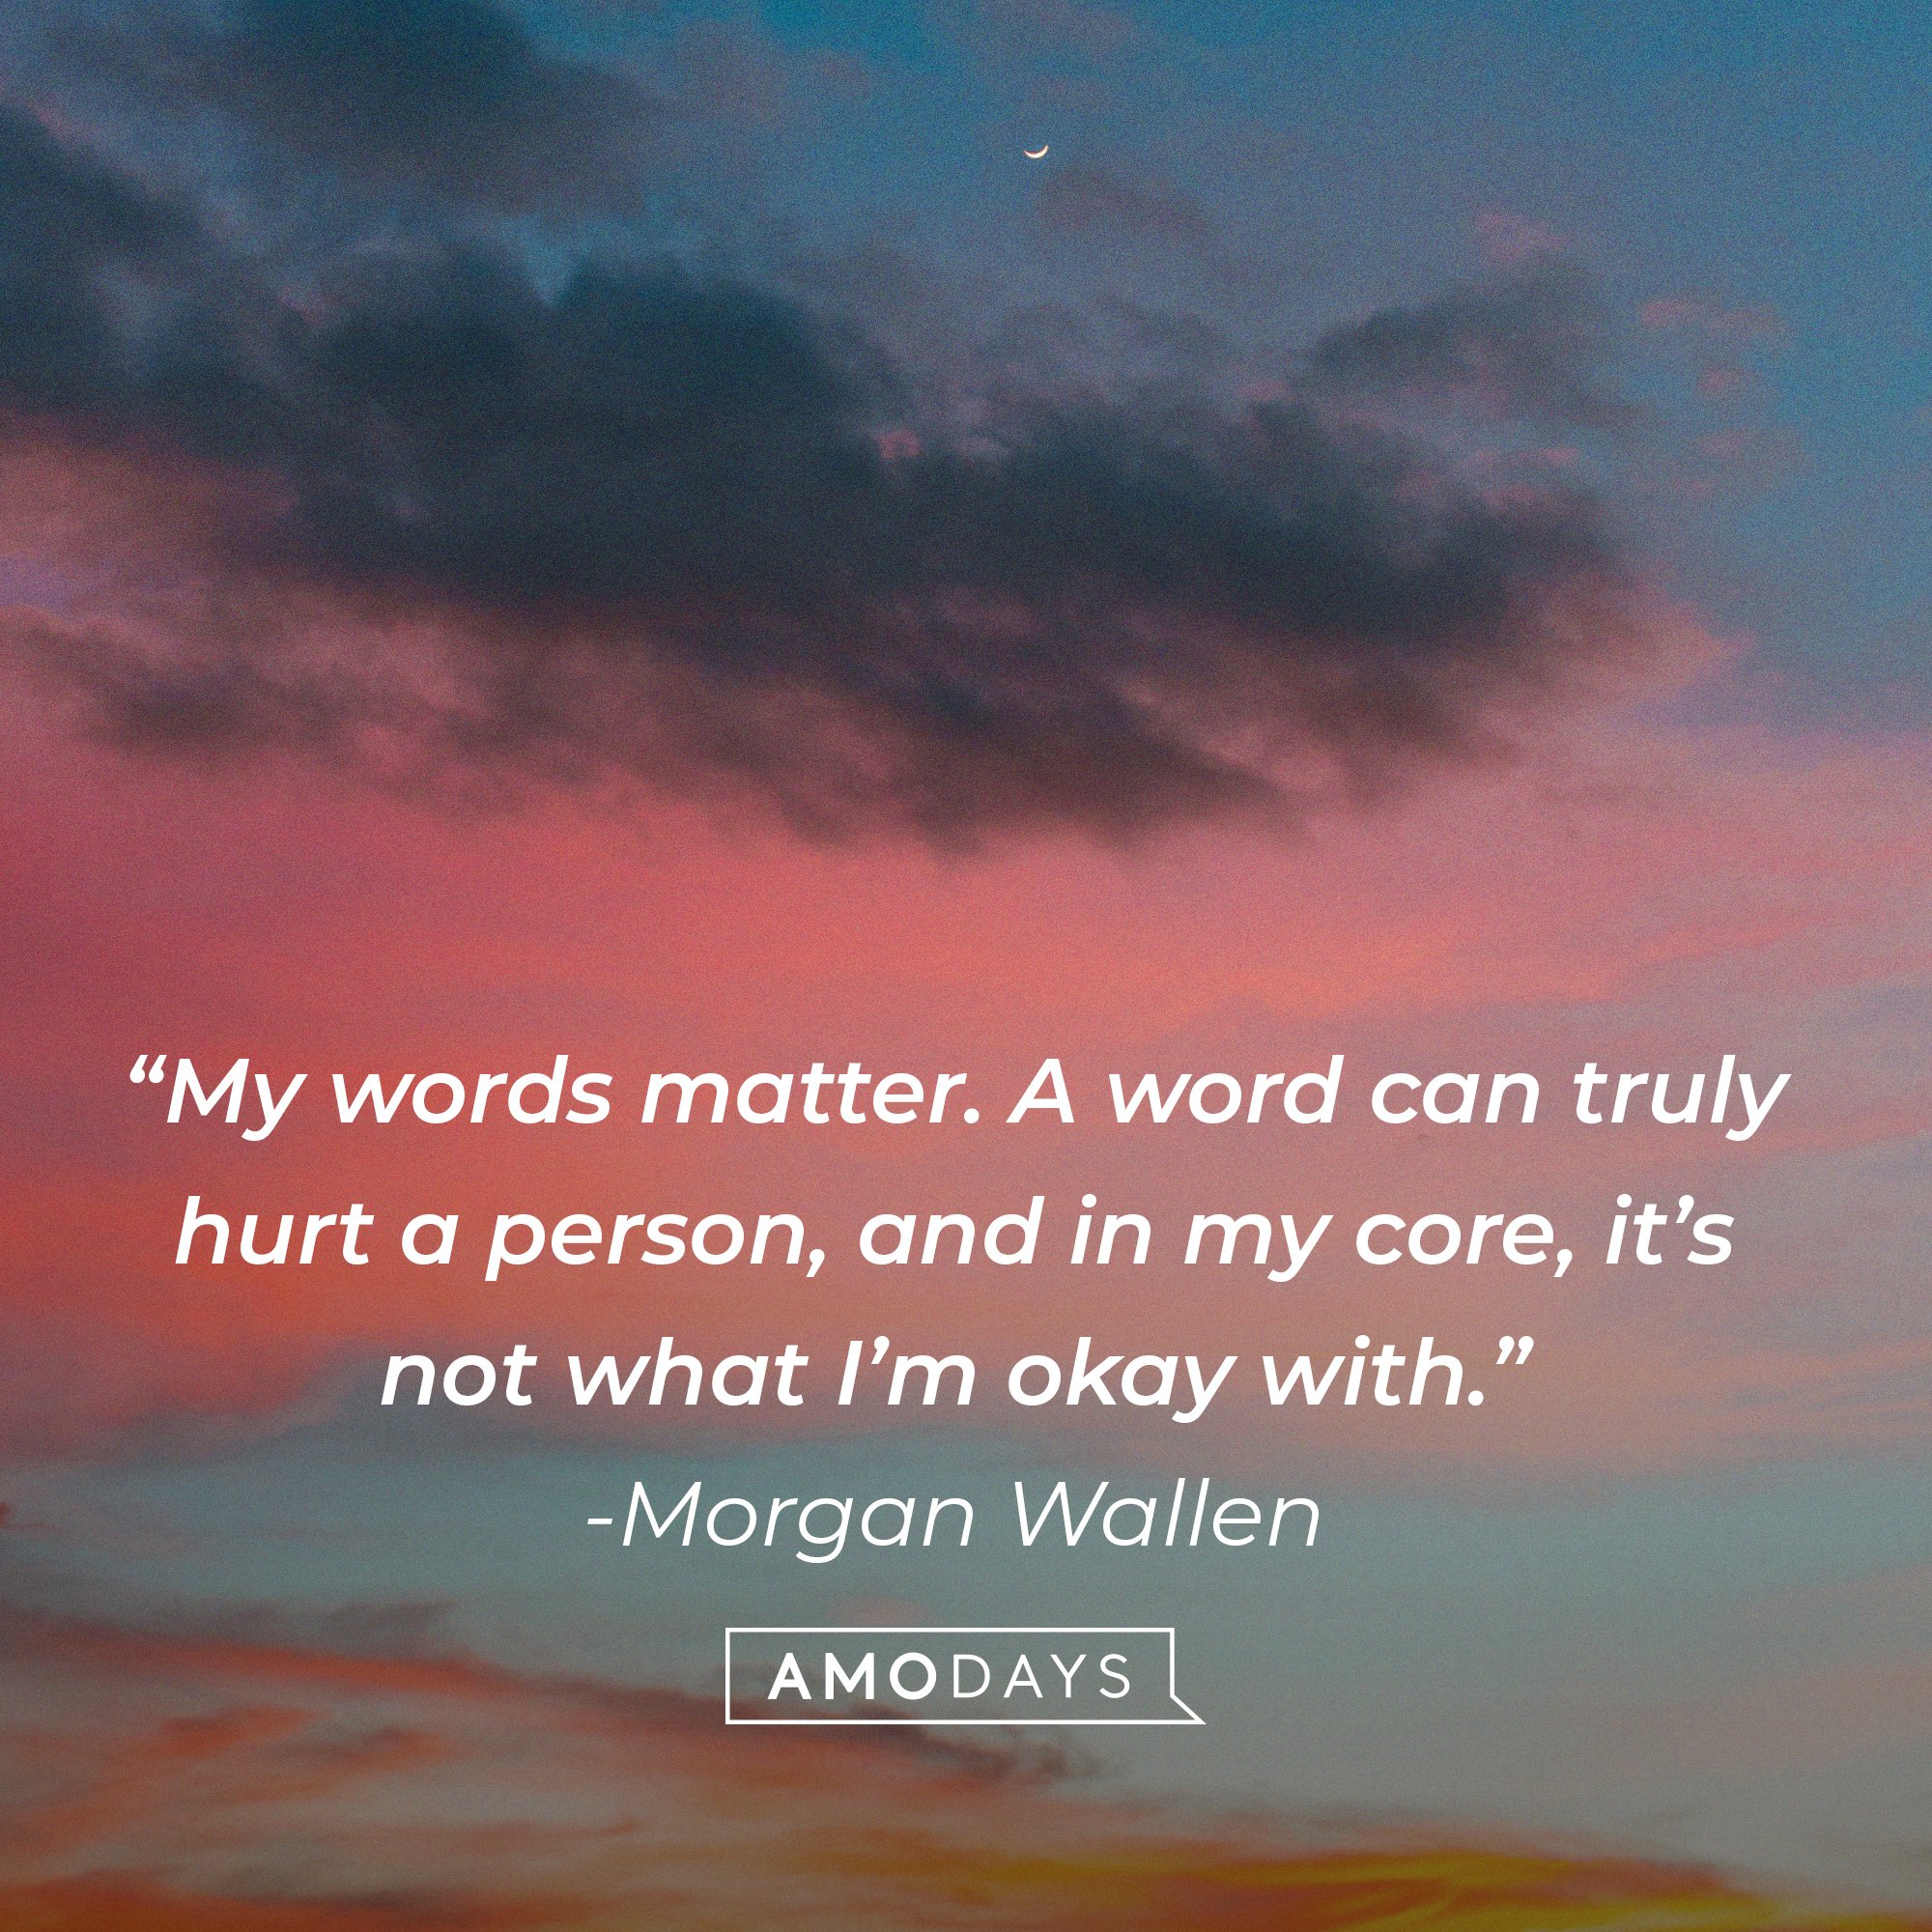  Morgan Wallen’s quote: “My words matter. A word can truly hurt a person, and in my core, it’s not what I’m okay with.” I Image: AmoDays